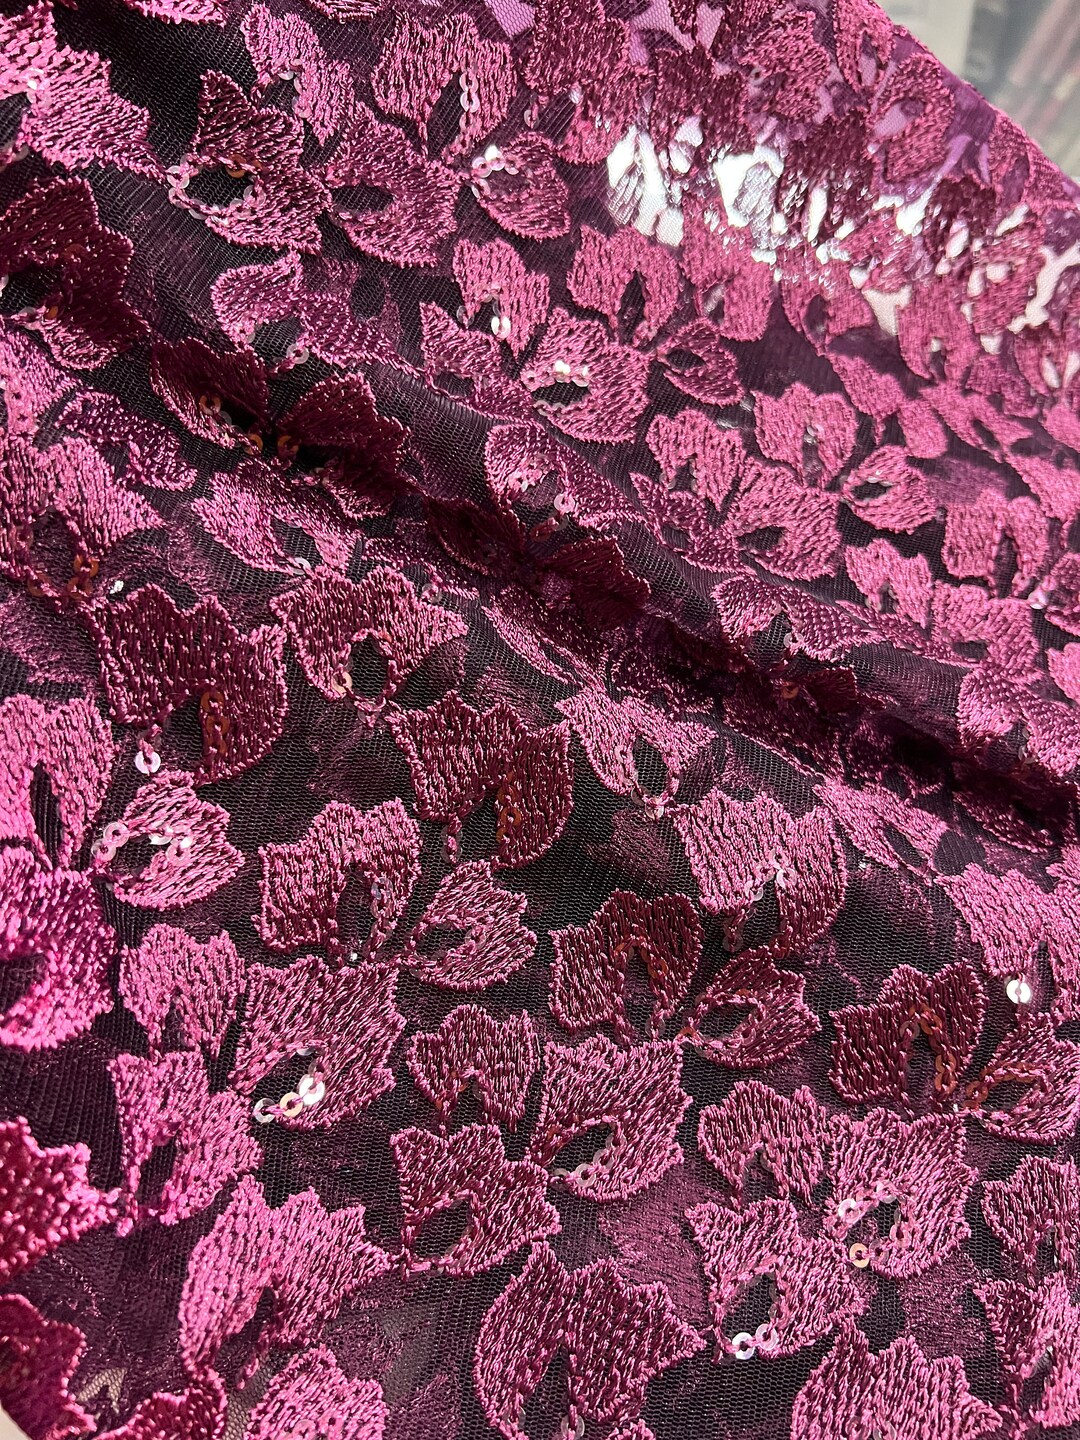 Embroidered Net Fabric Embellished With Sequins - Etsy